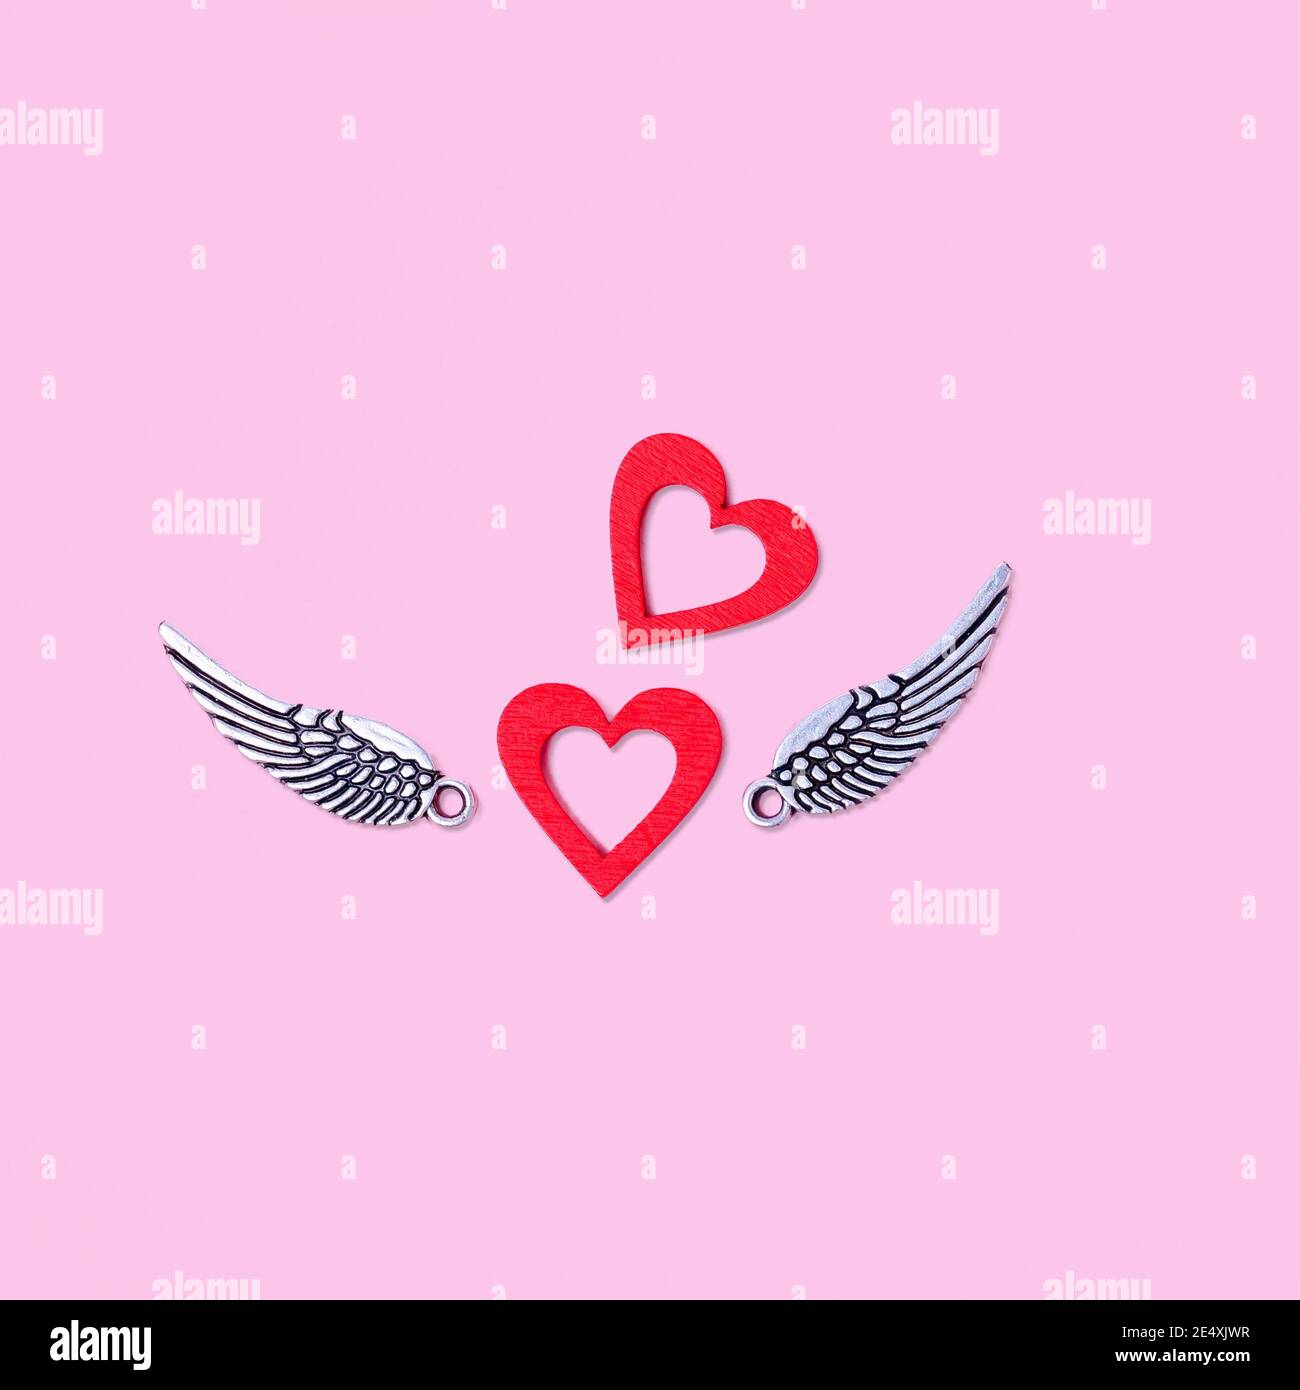 Two red hearts with silver wings on a pink background Stock Photo